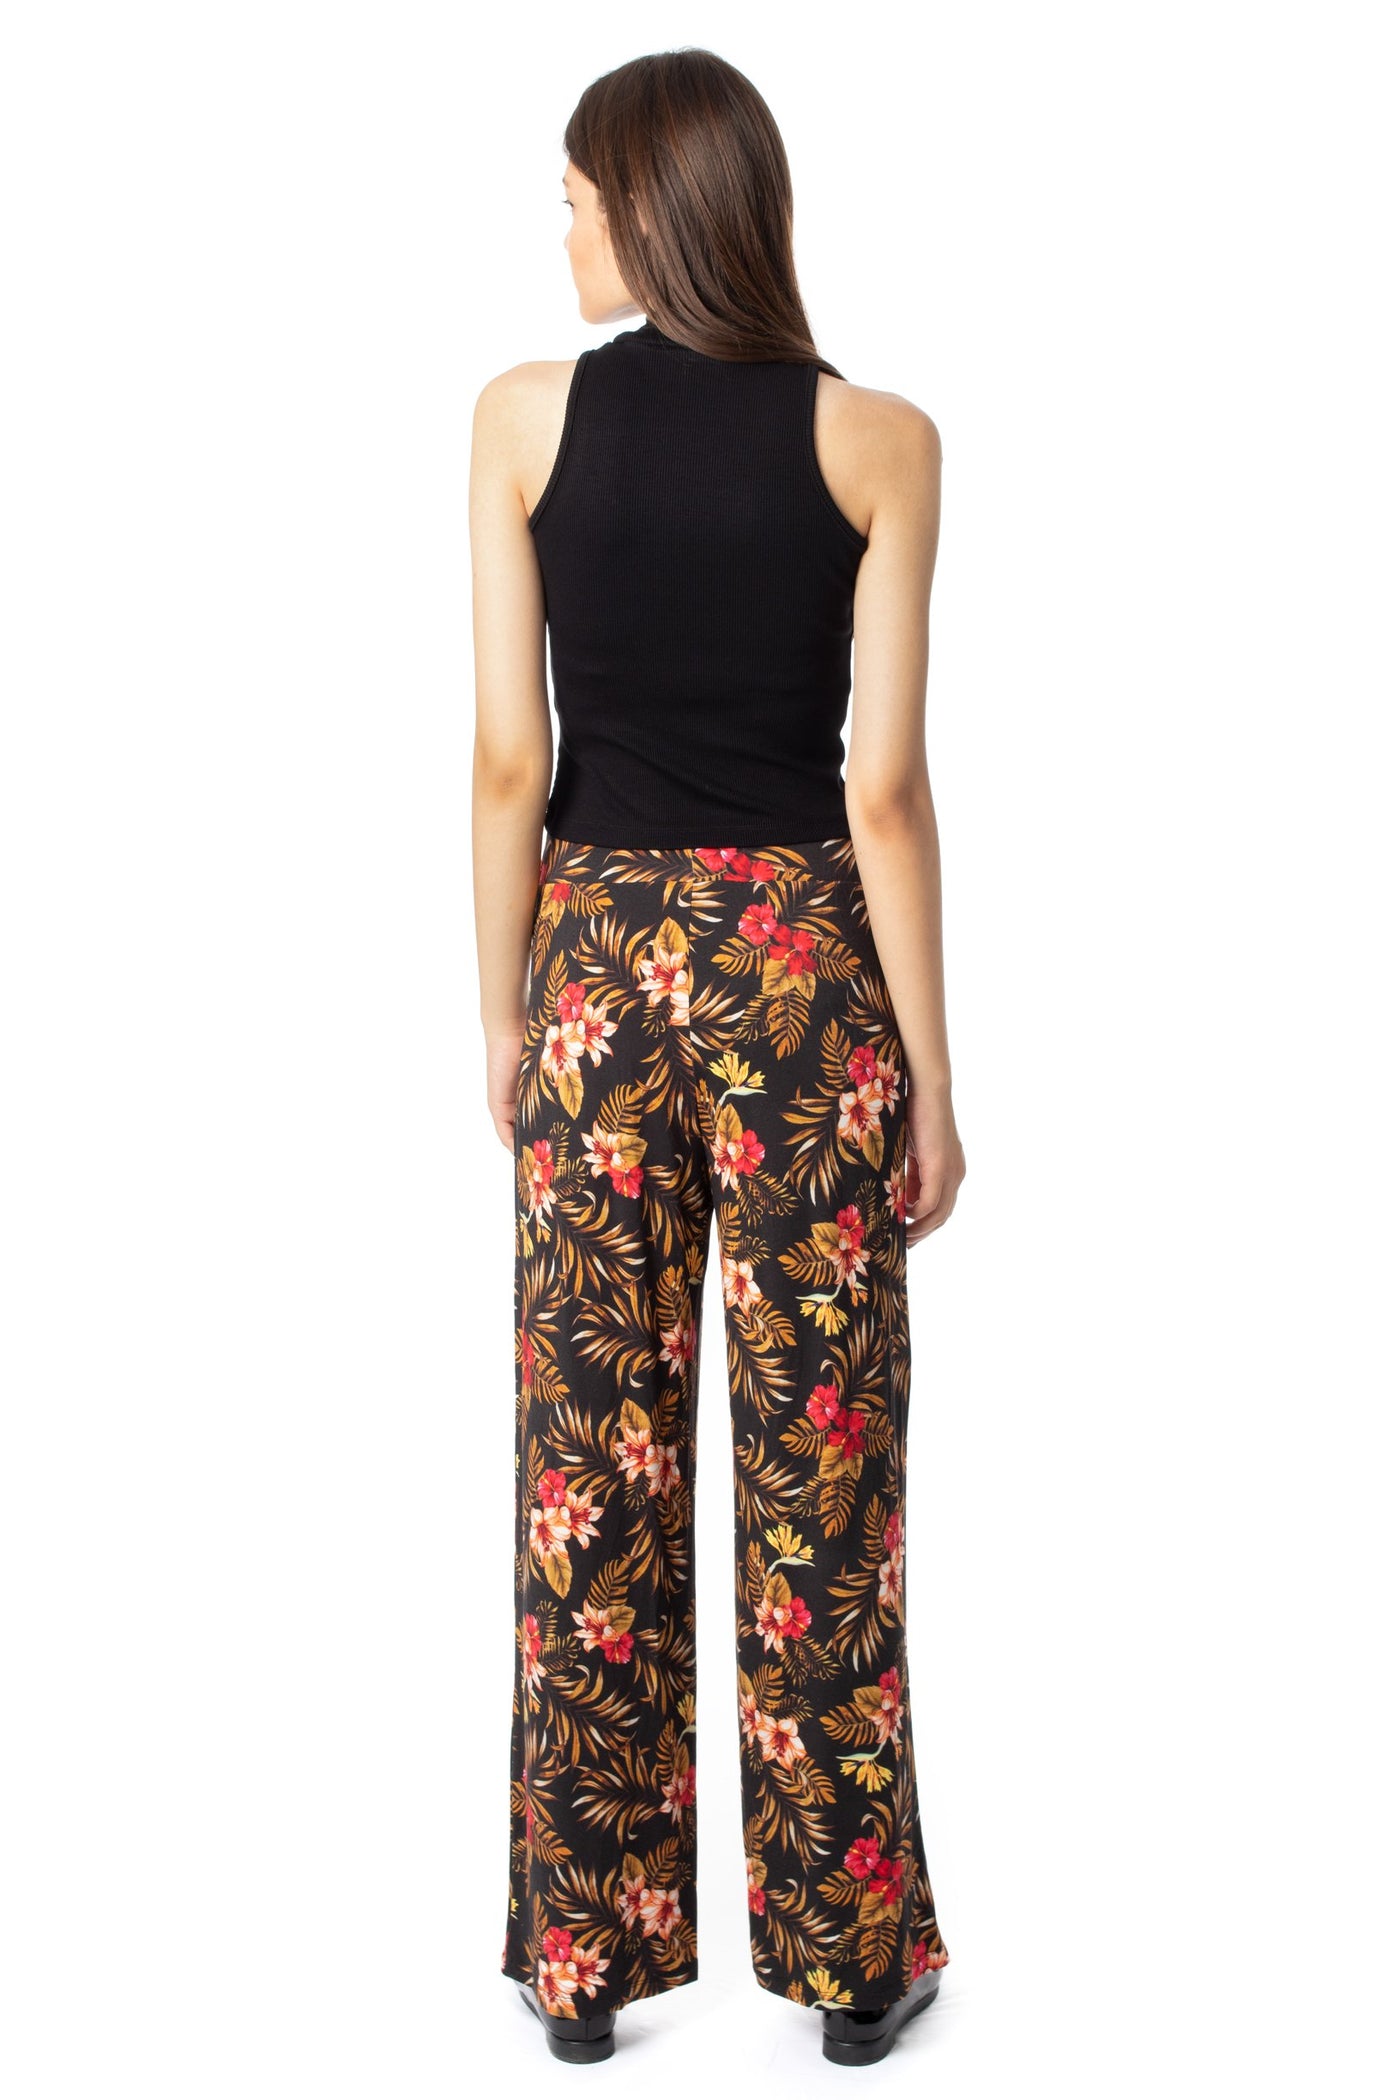 chassca floral printed wide leg pant - Breakmood